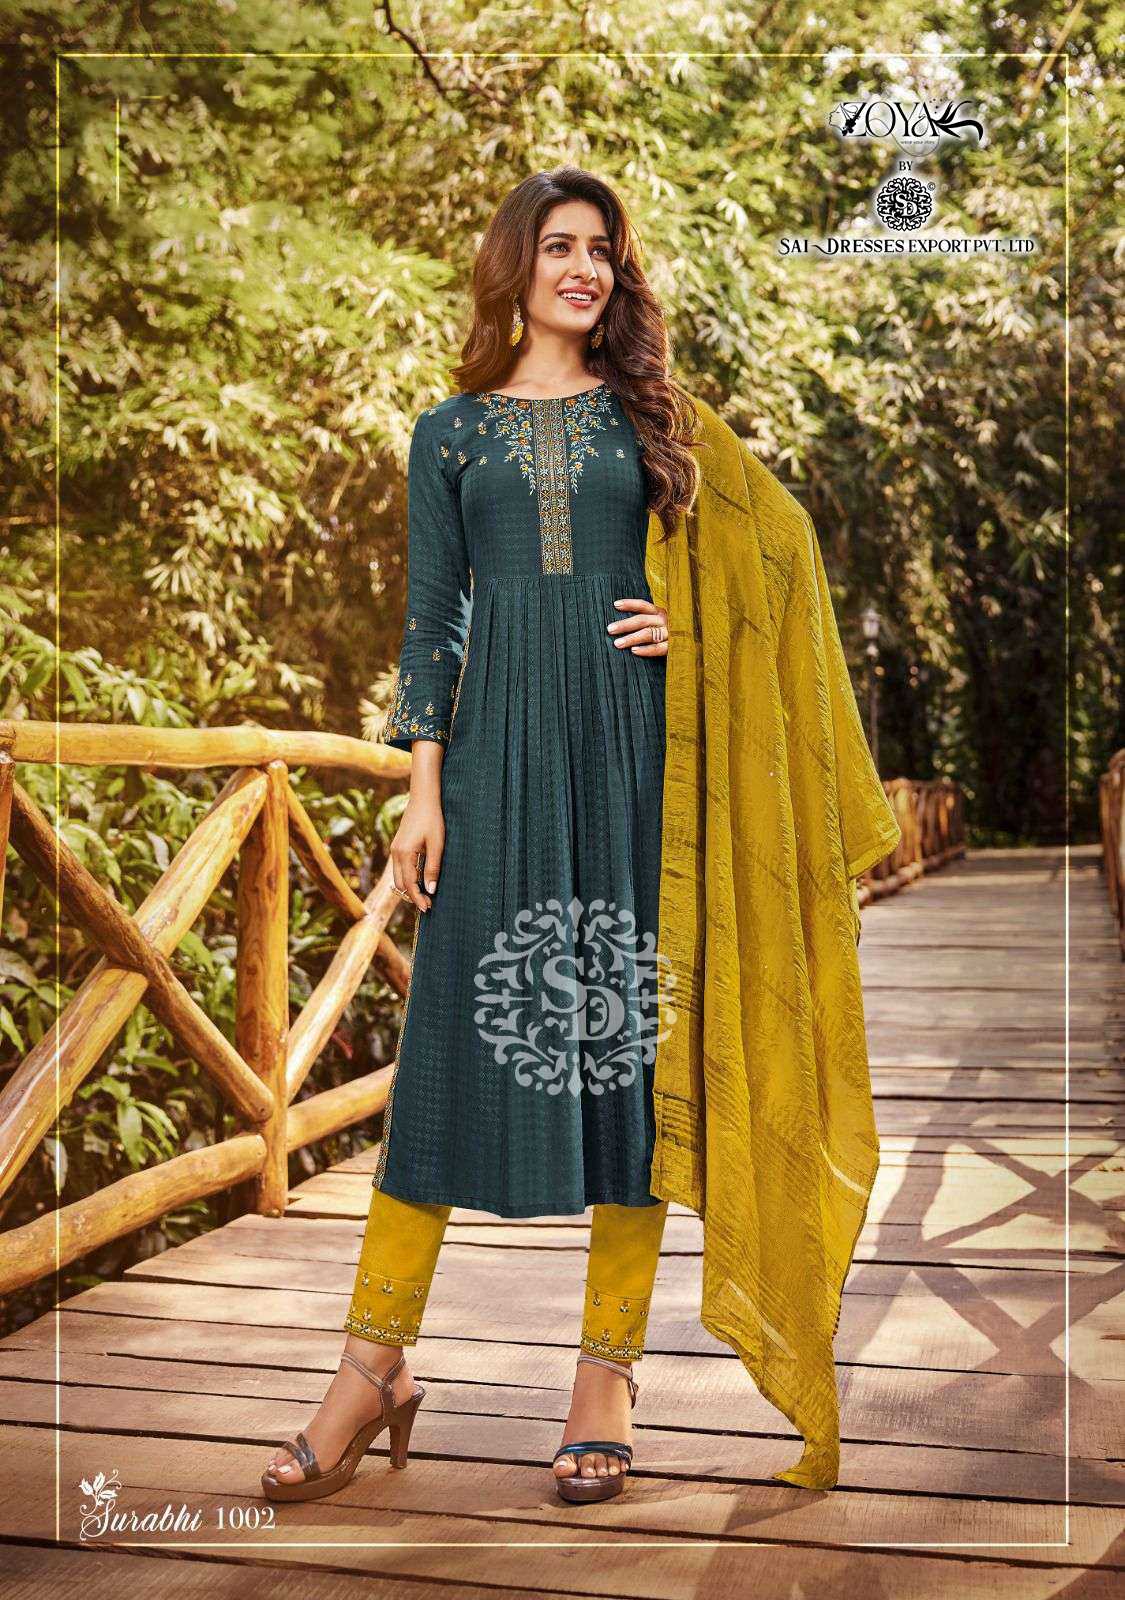 SAI DRESSES PRESENT SURABHI READY TO FESTIVAL WEAR NAYRA CUT WITH PANT STYLE DESIGNER 3 PIECE SUITS IN WHOLESALE RATE IN SURAT